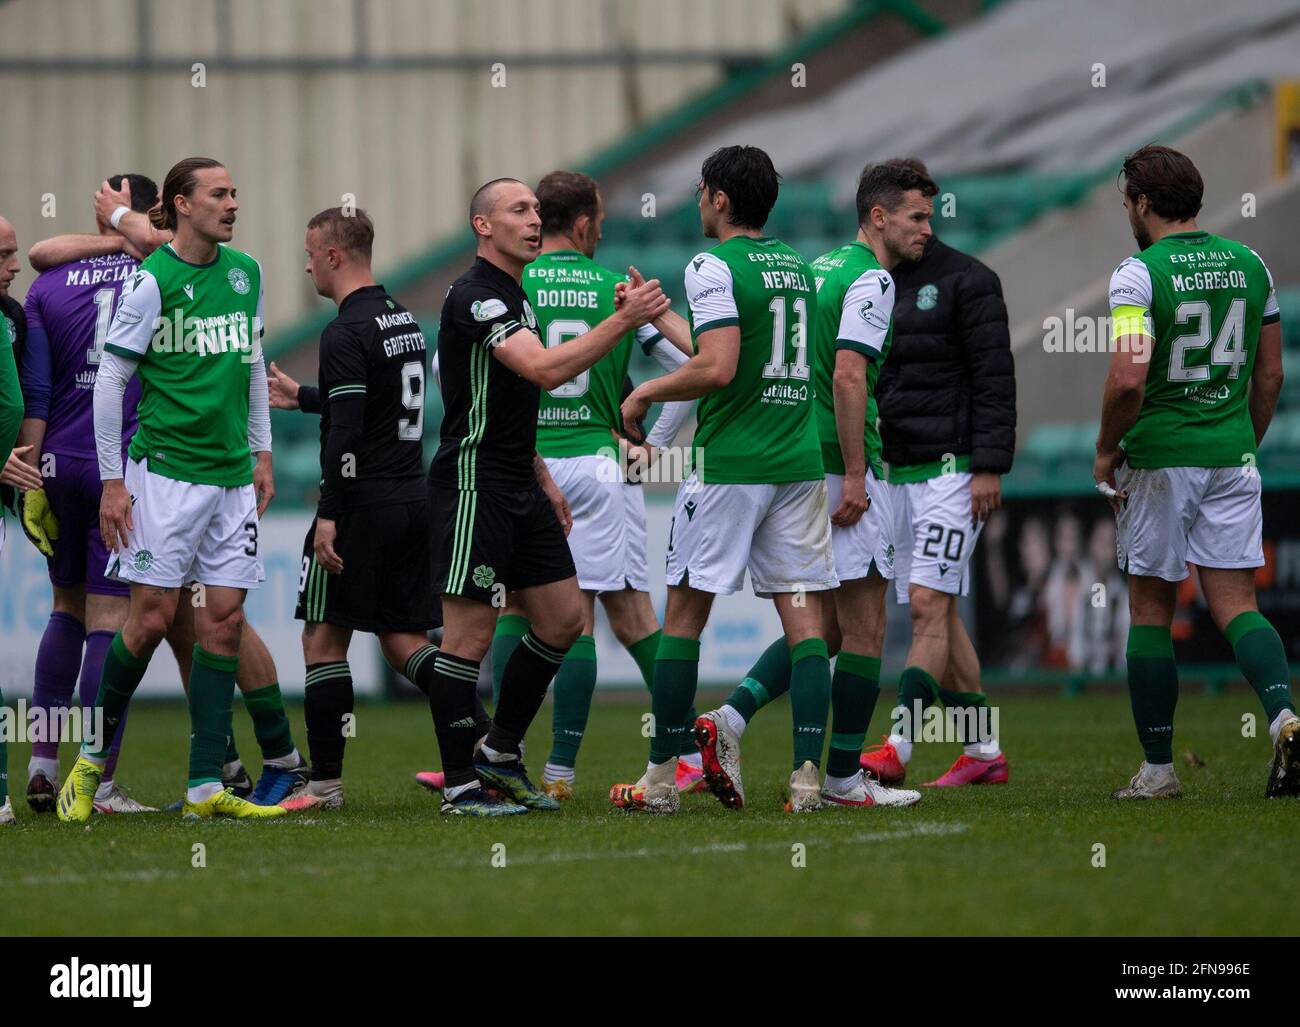 Scottish Premiership - Hibernian v Celtic. Easter Road Stadium, Edinburgh, Midlothian, UK. 15th May, 2021. Hibs play host to Celtic in the Scottish Premier League at Easter road, Edinburgh. Pic shows: Sporting handshakes for Celtic midfielder, Scott Brown, from the Hibs players at the end of the game. Credit: Ian Jacobs/Alamy Live News Stock Photo